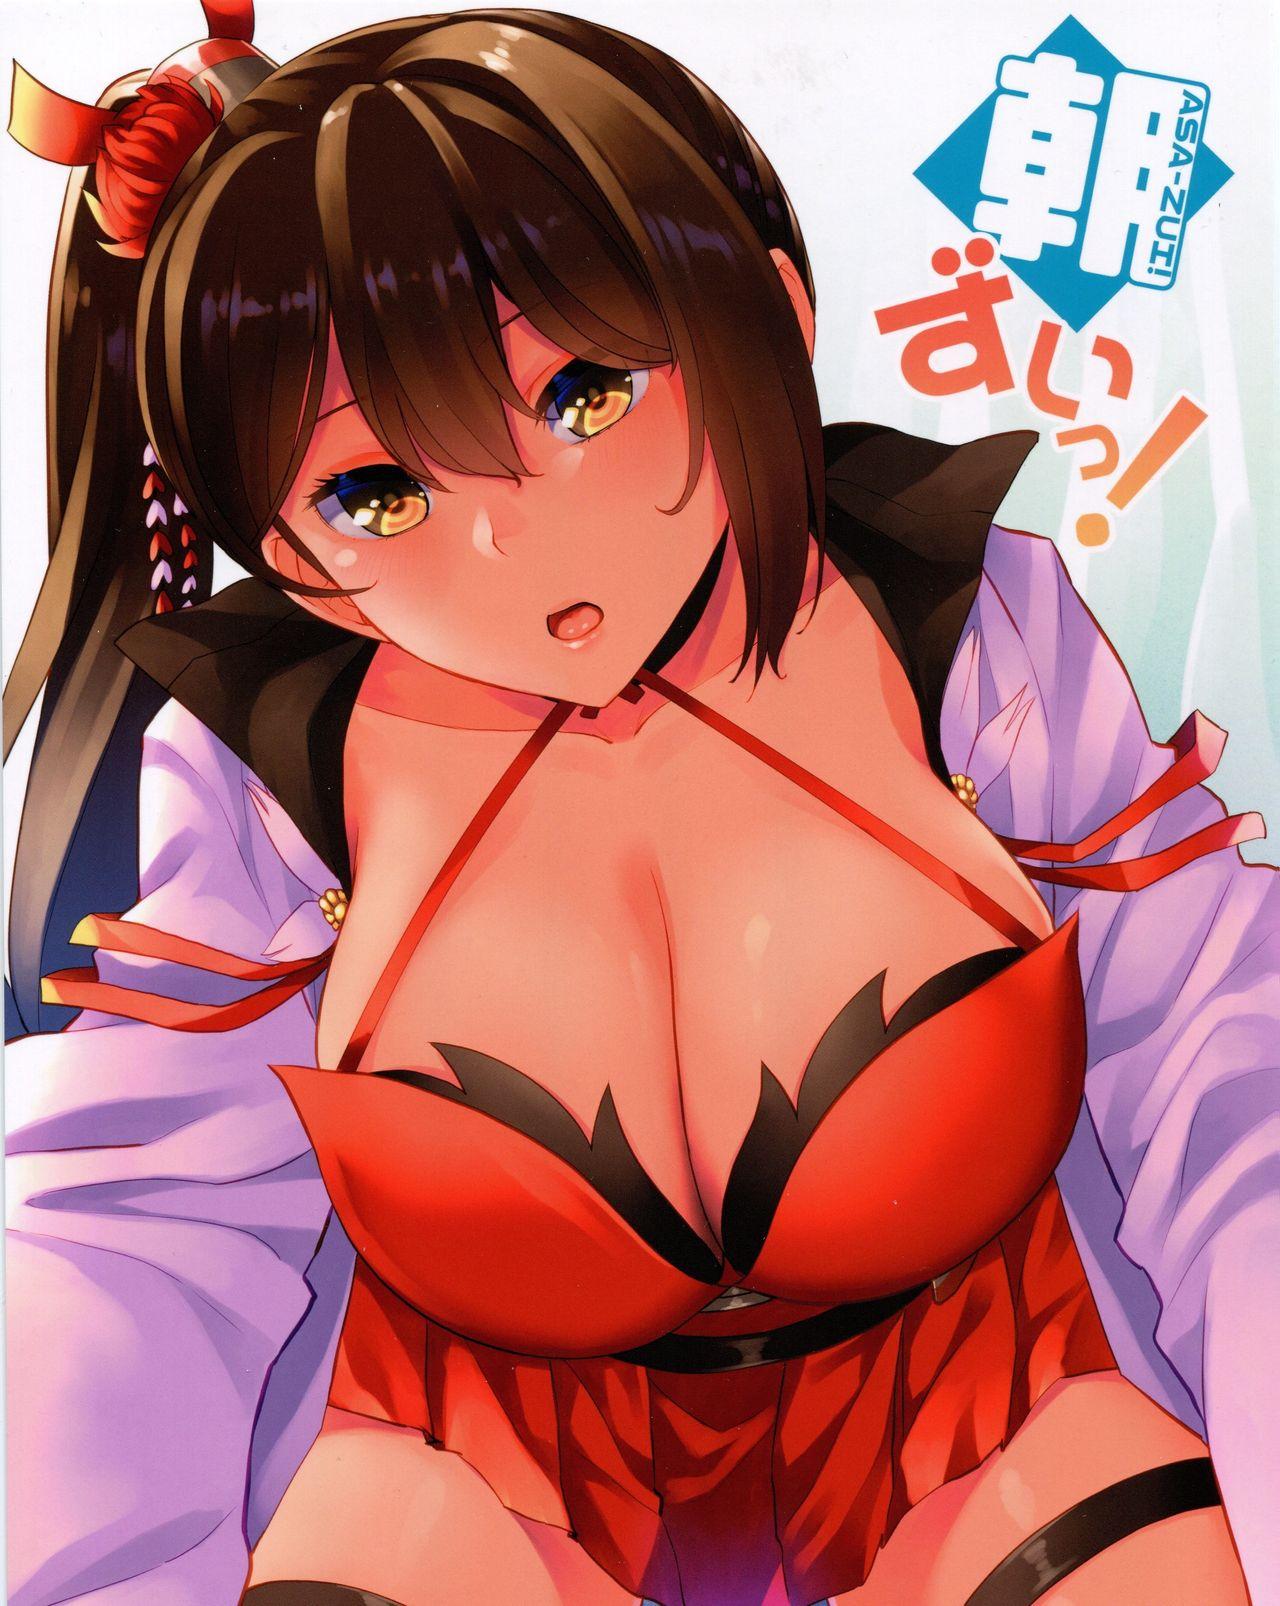 Clothed Asa-Zui! - Azur lane Yanks Featured - Page 1